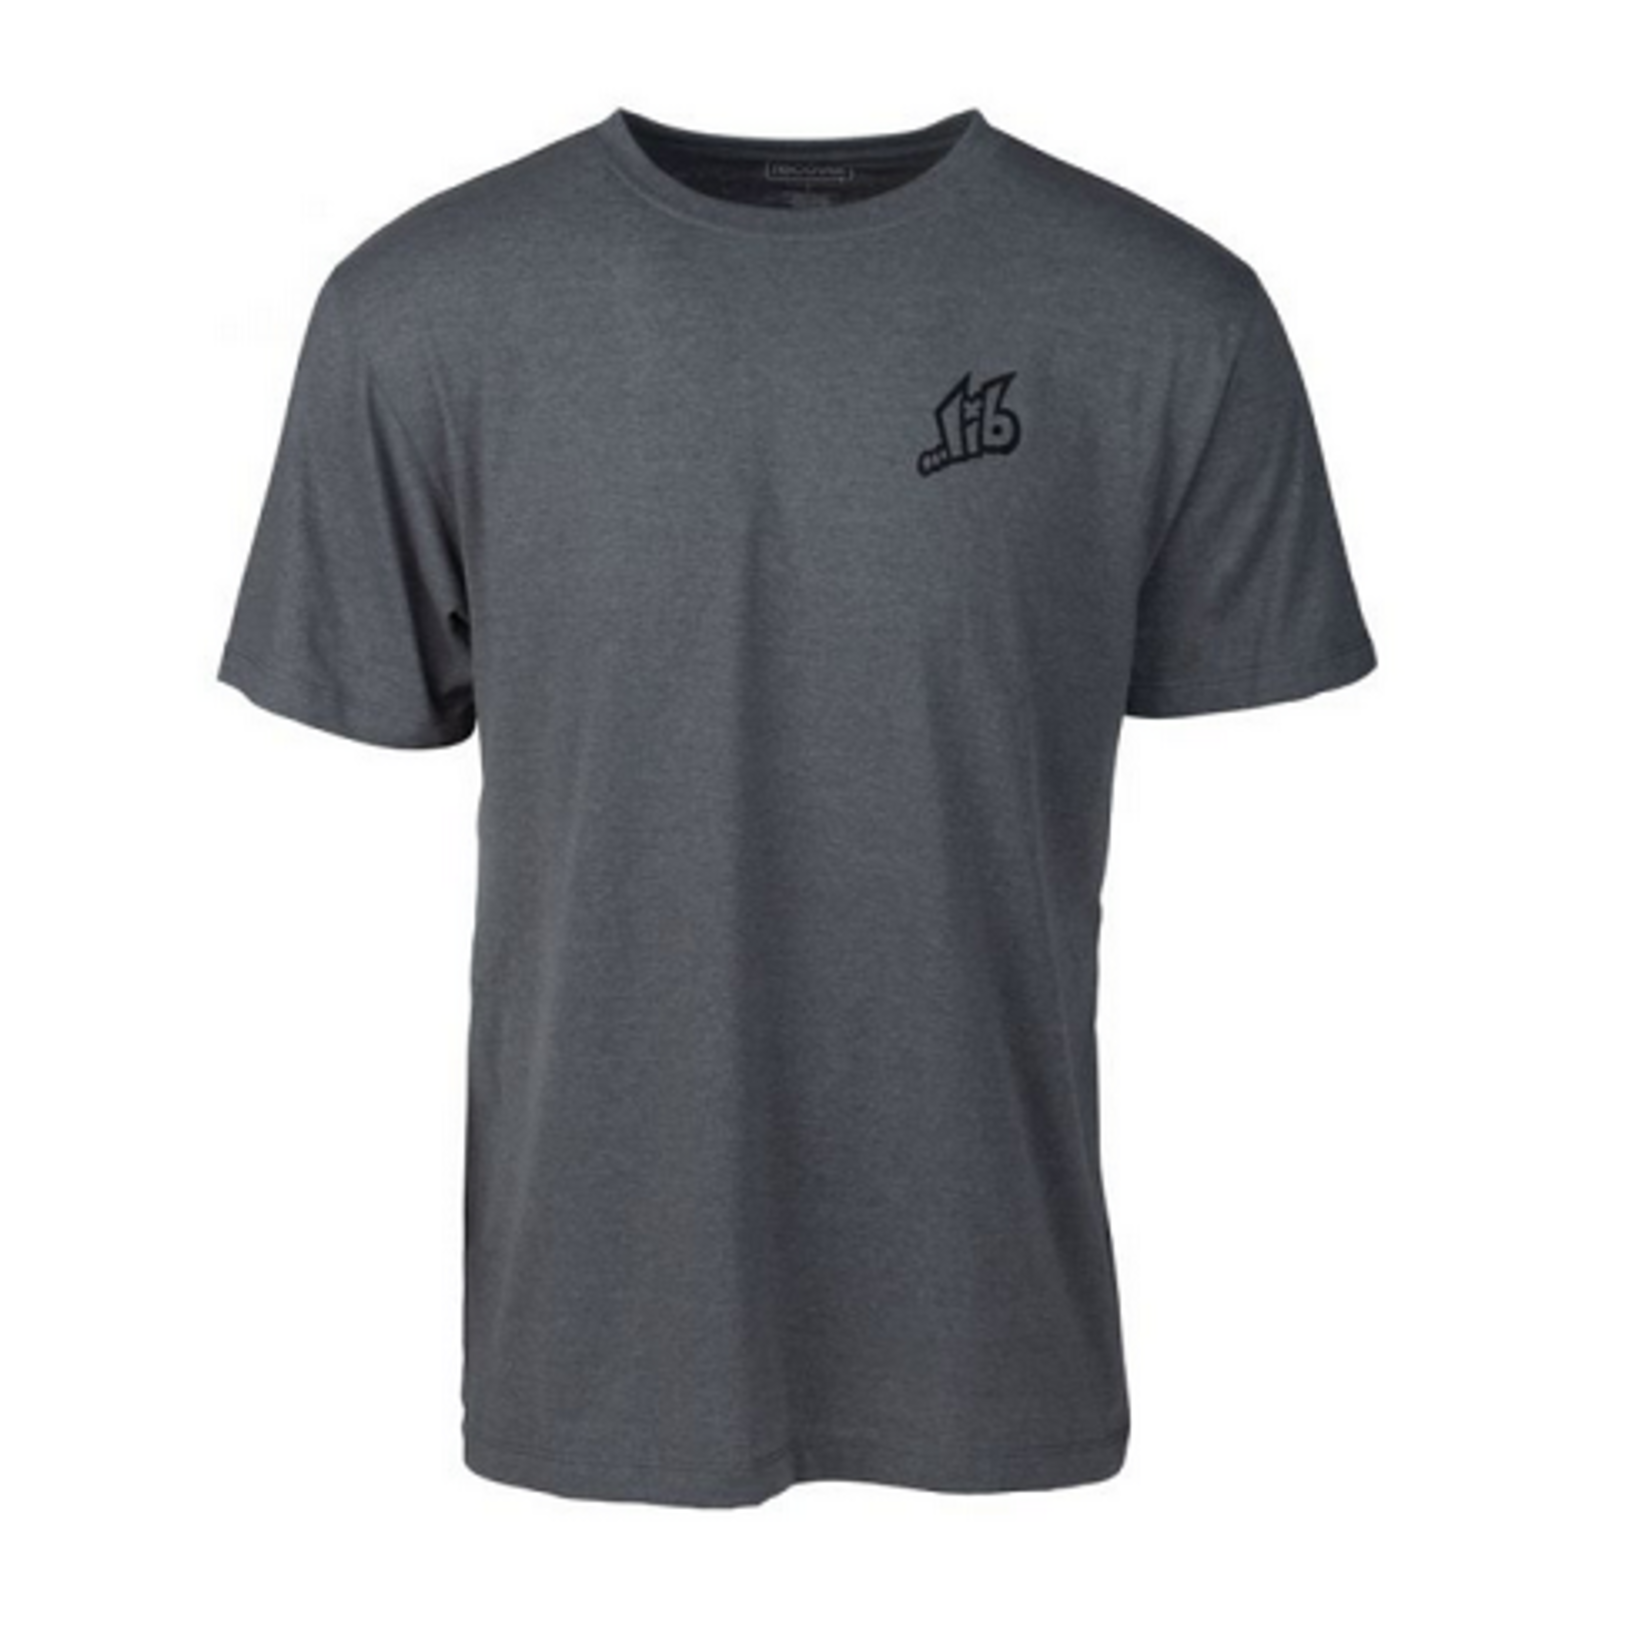 Libtech T-SHIRT LOST ECO 2 DARK GRAY 100% RECYCLED LARGE